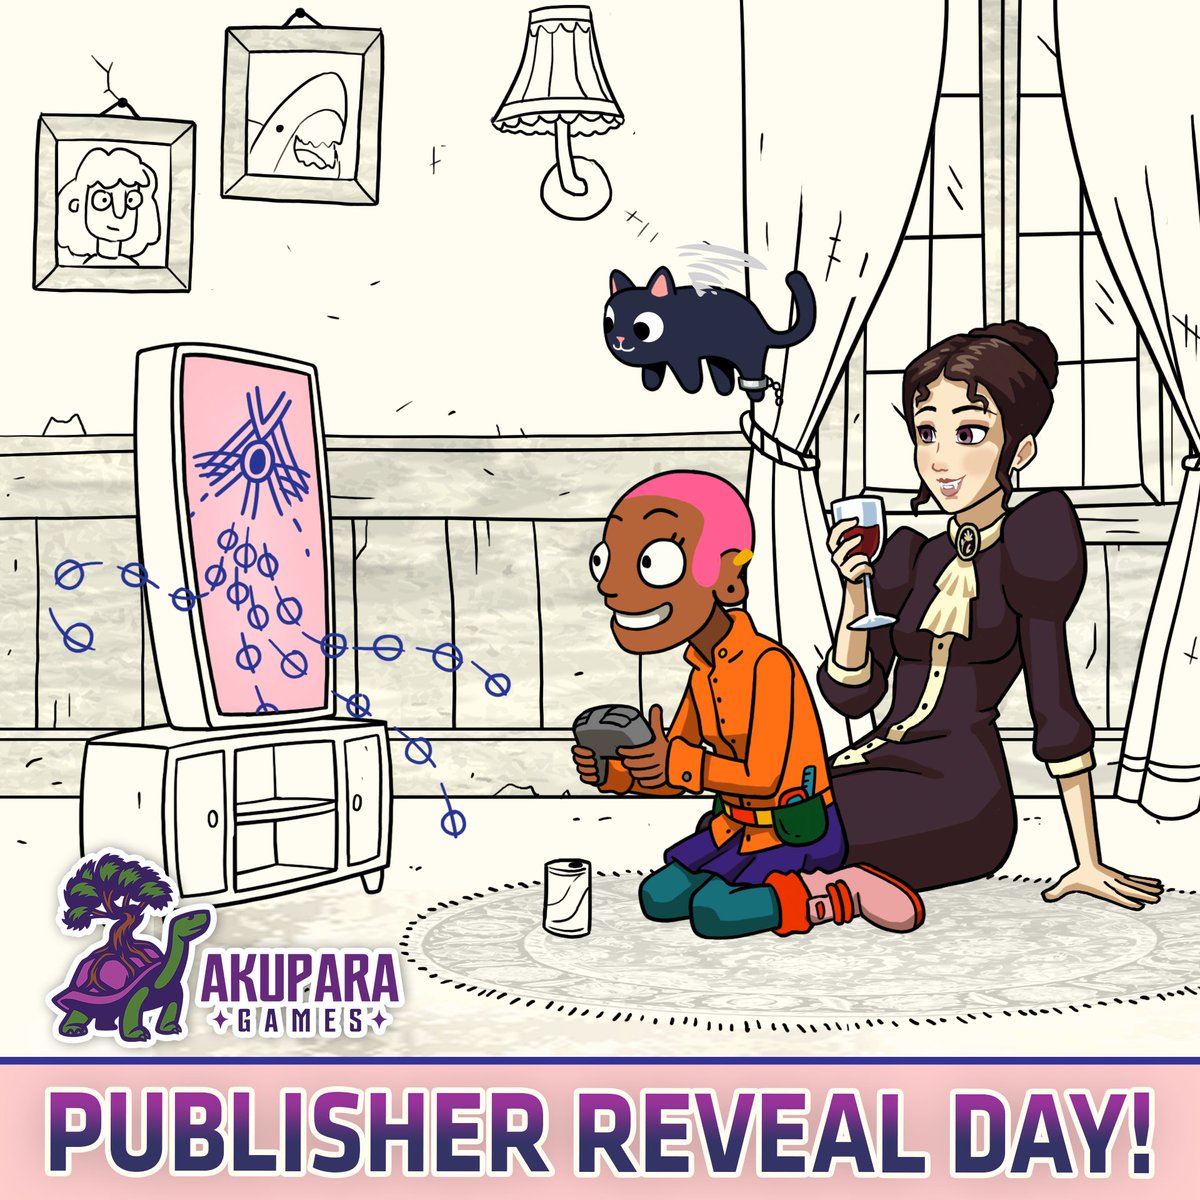 📣🔥 It's PUBLISHER REVEAL DAY! 🔥📣 We're excited to welcome ✨FOUR✨ new titles to the 🐢 Akupara publishing fam 💜 🩸 Cabernet by @PIntroverts 🐹 Nanomon by @moomoomang 📚 Welcome to Elk by @TripleTopping 📐 Ynglet by @Nifflas